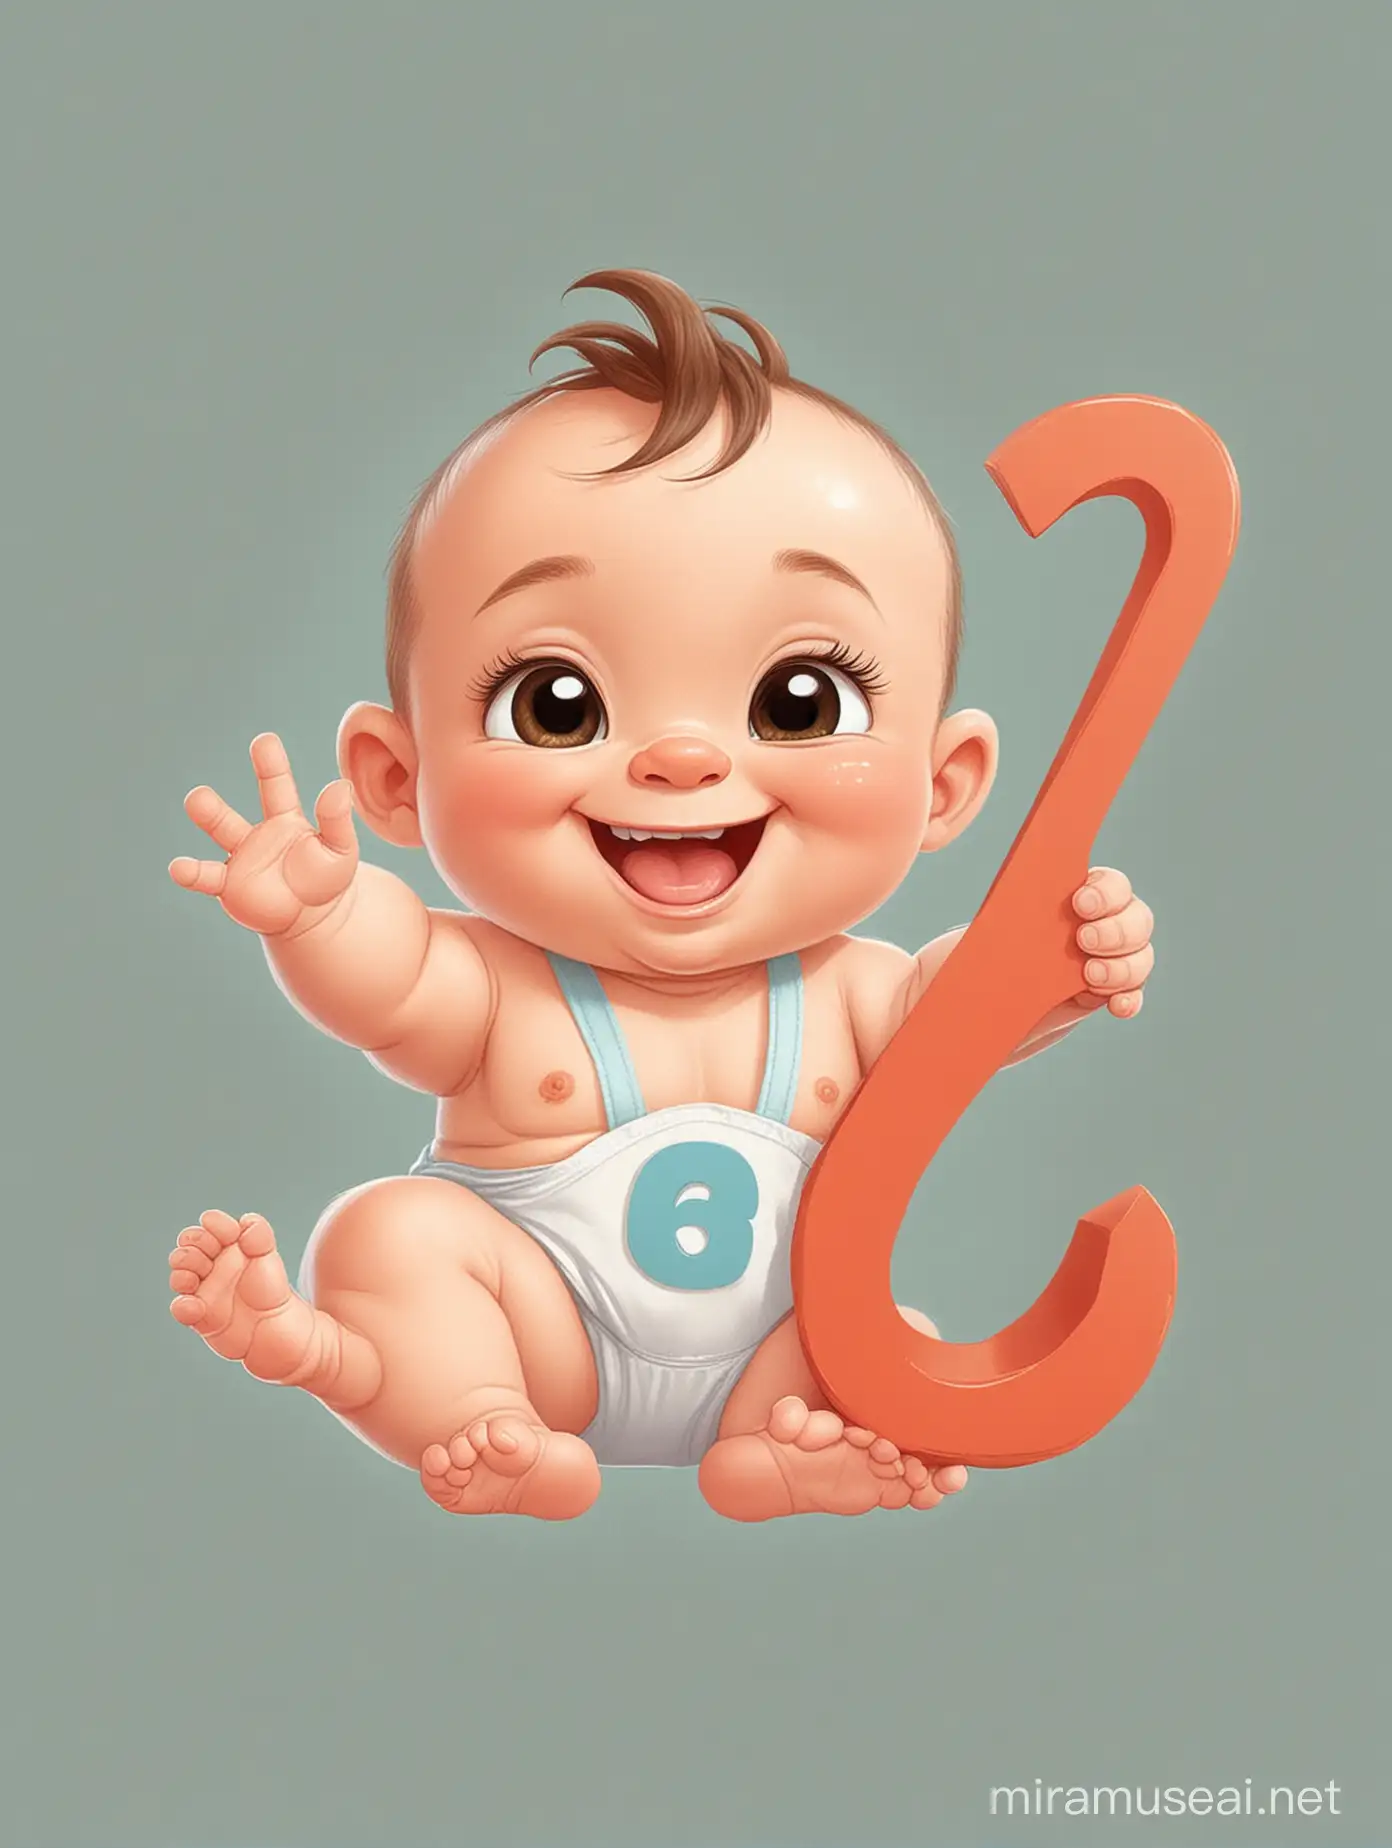 A cartoon baby smiling hold number 6 in his hand